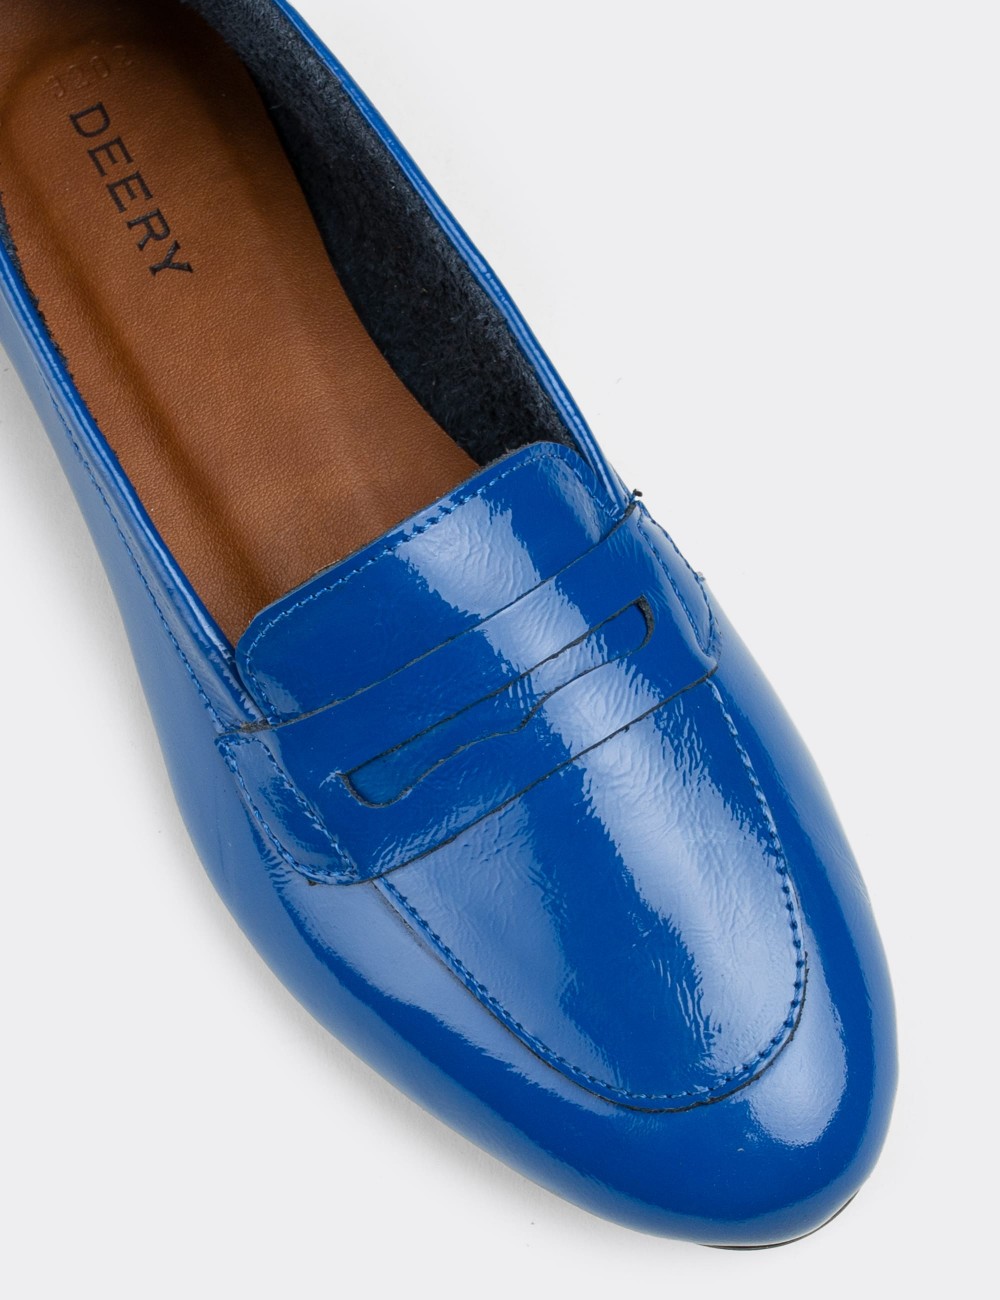 Blue Patent Leather Loafers  - E3202ZMVIC06